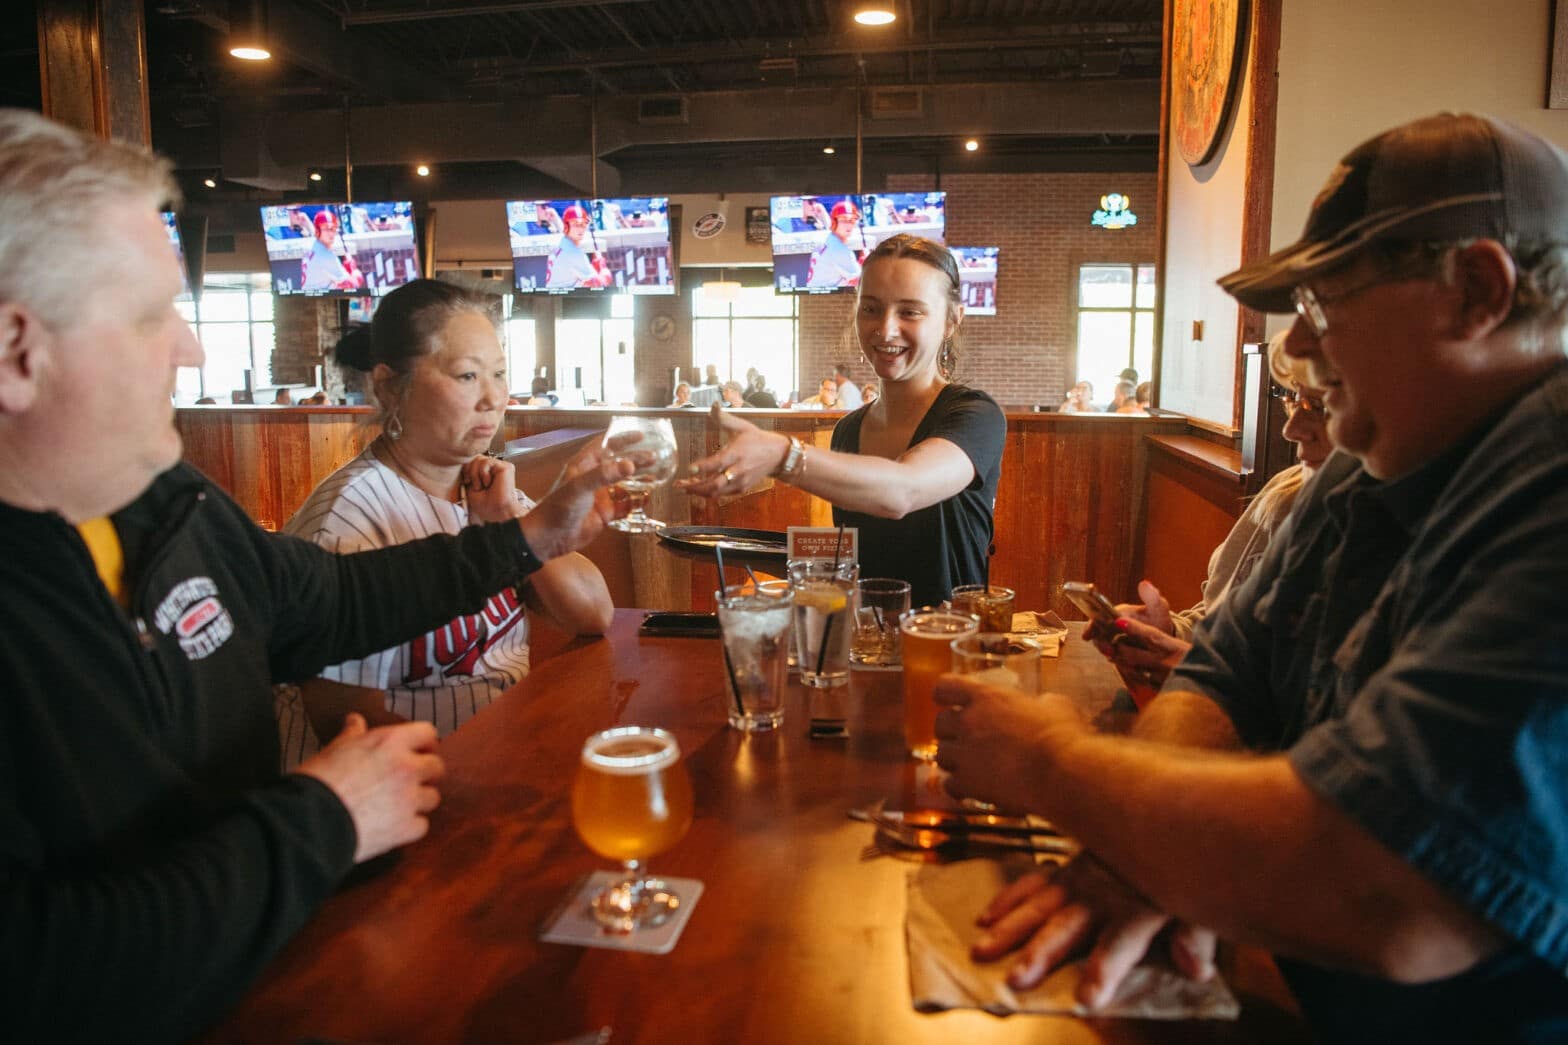 Featured image for post: Enjoy Football & Beer At Crooked Pint